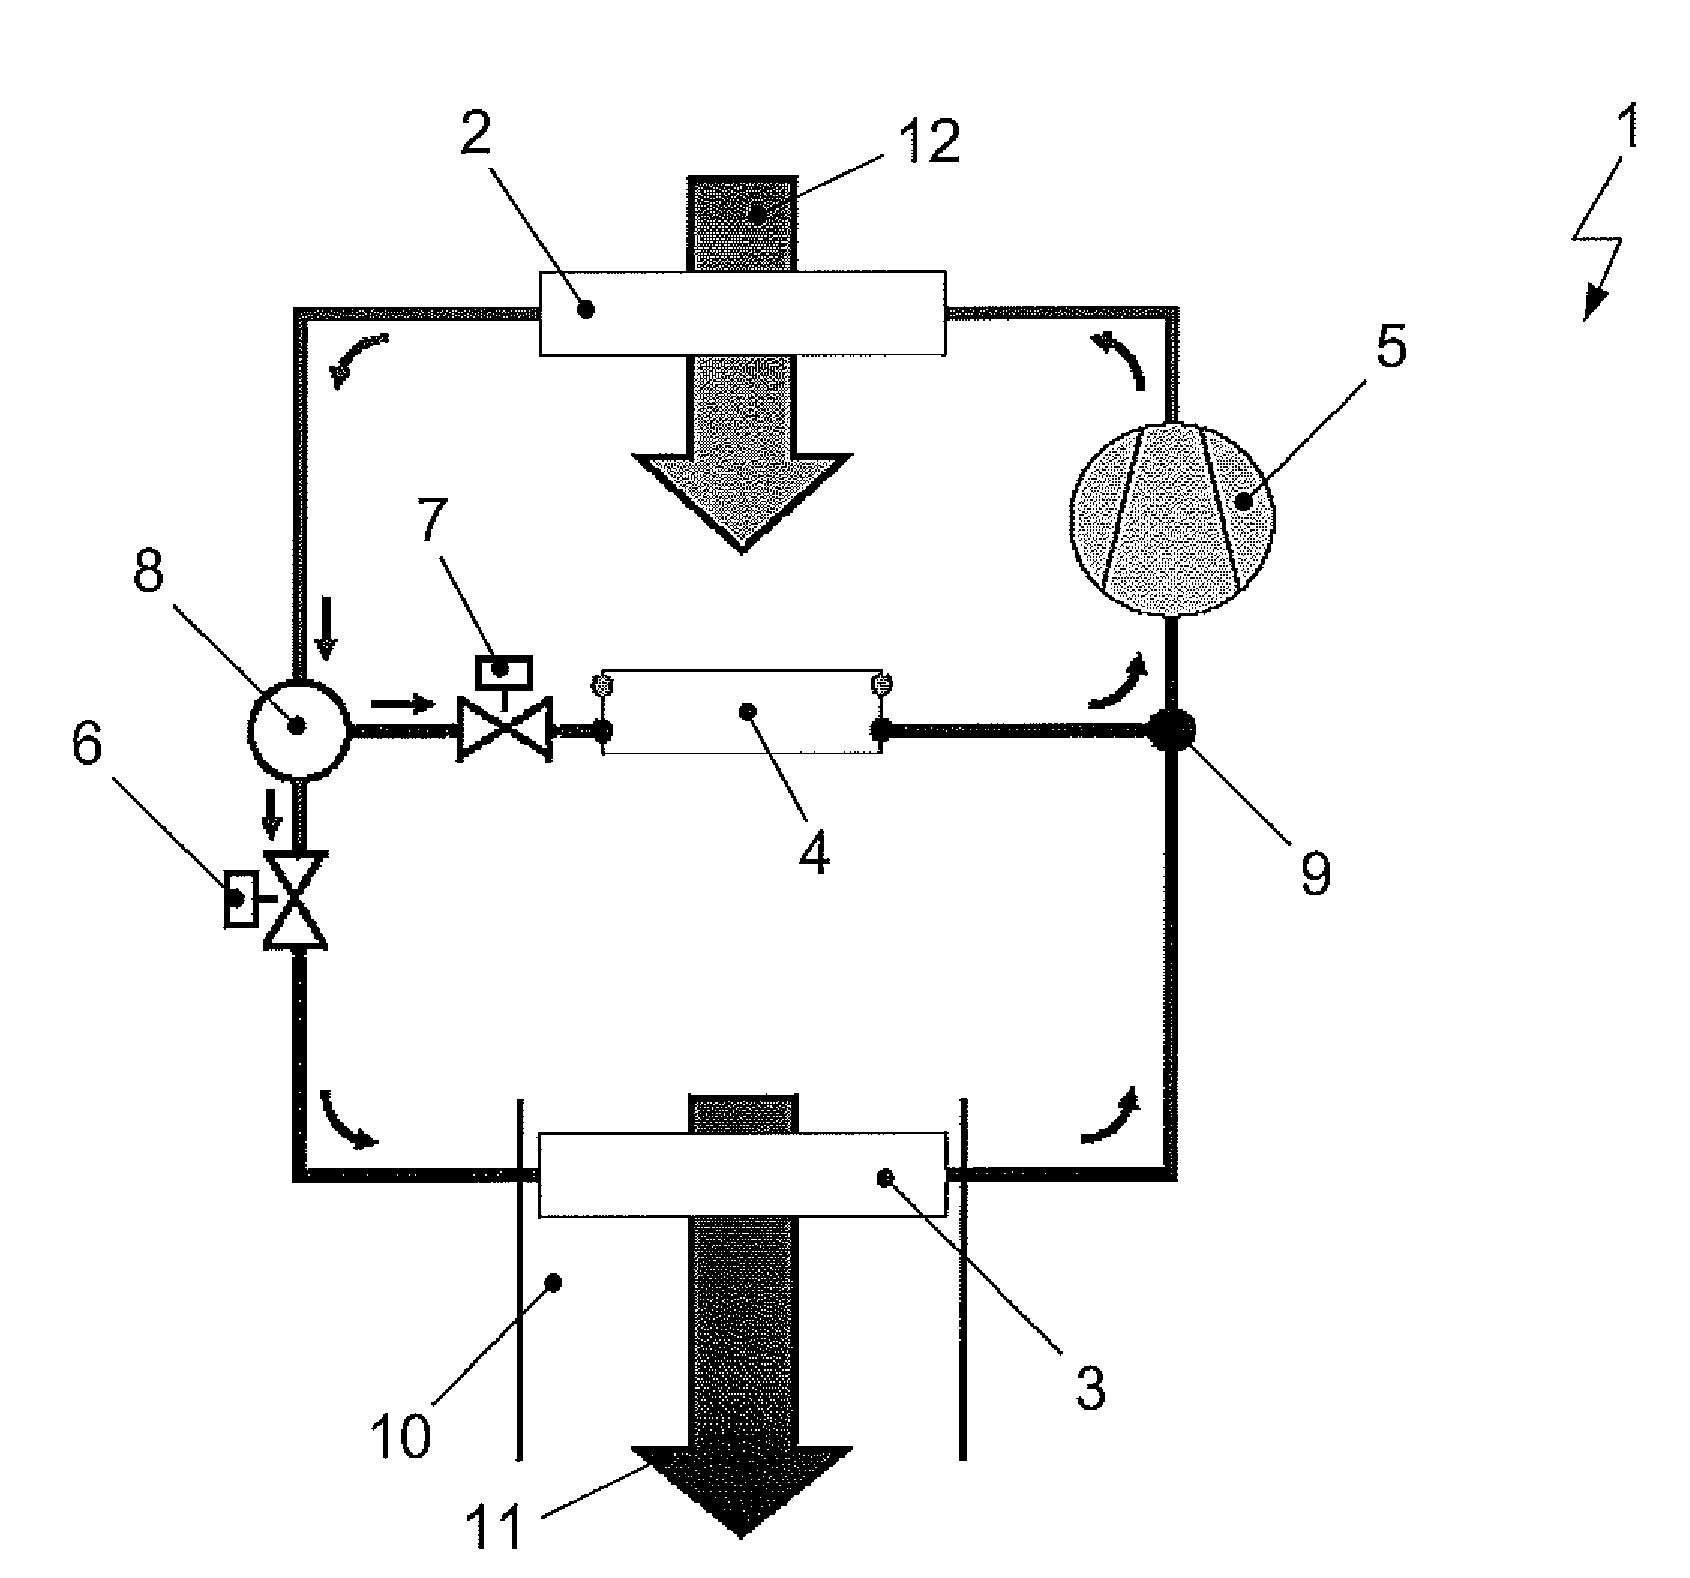 Refrigerant circuit of an HVAC system of a motor vehicle